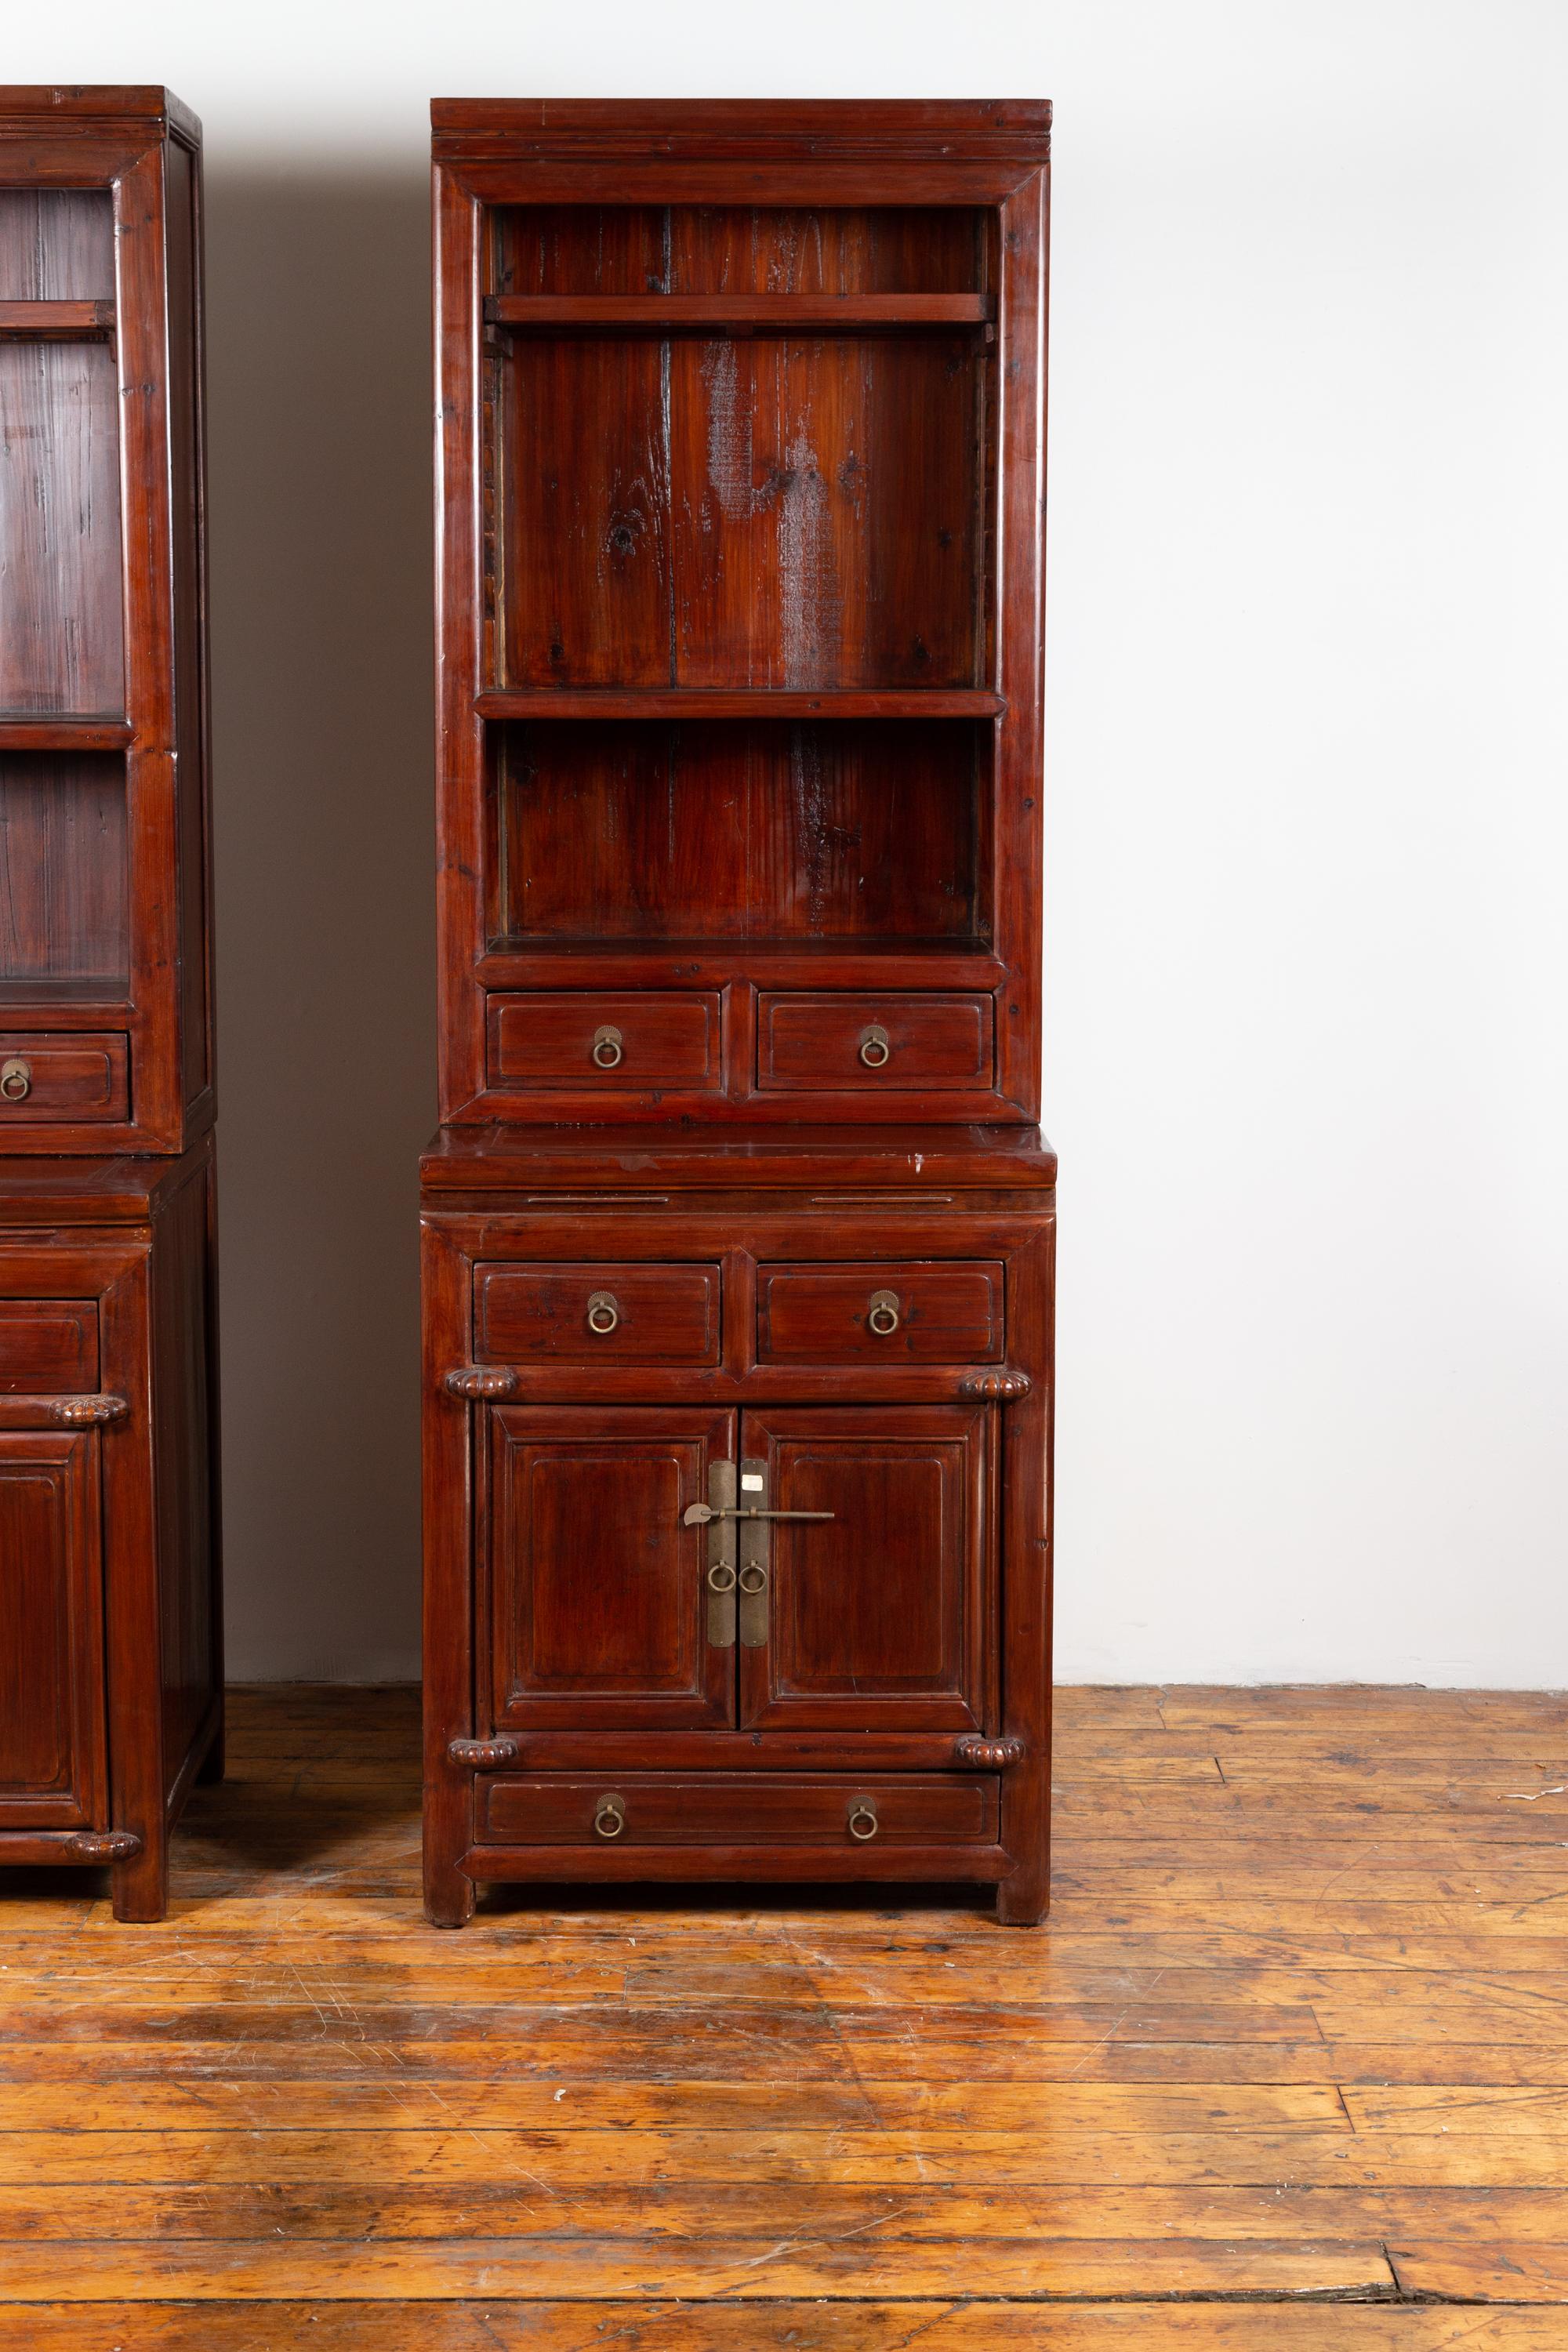 A tall Chinese antique two-part wooden lacquered cabinet from the early 20th century, with open shelves, doors and drawers, perfect to work as a pair with its twin (see item LU863916021382). Born in China during the early years of the 20th century,